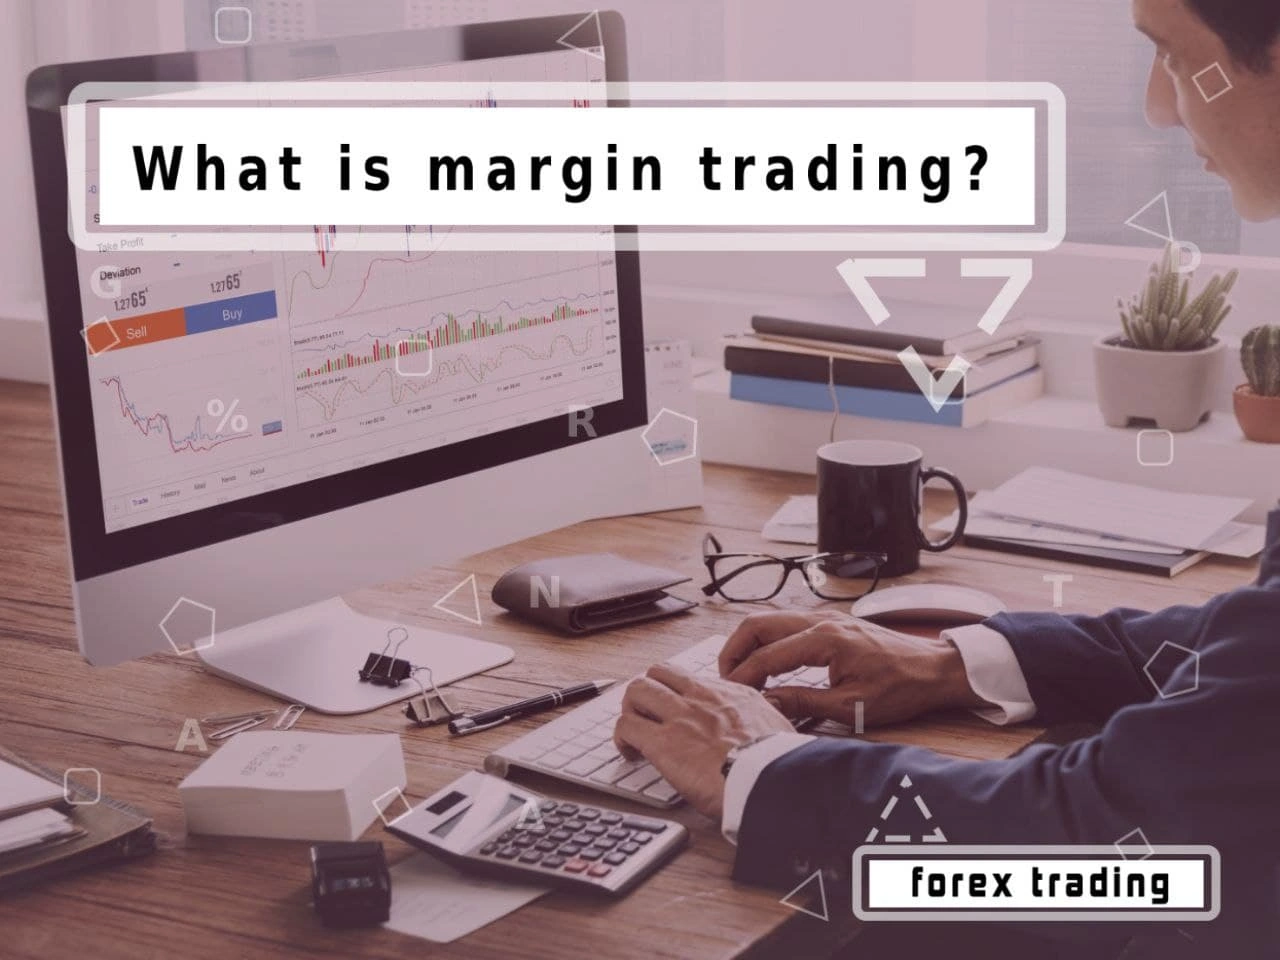 What is forex